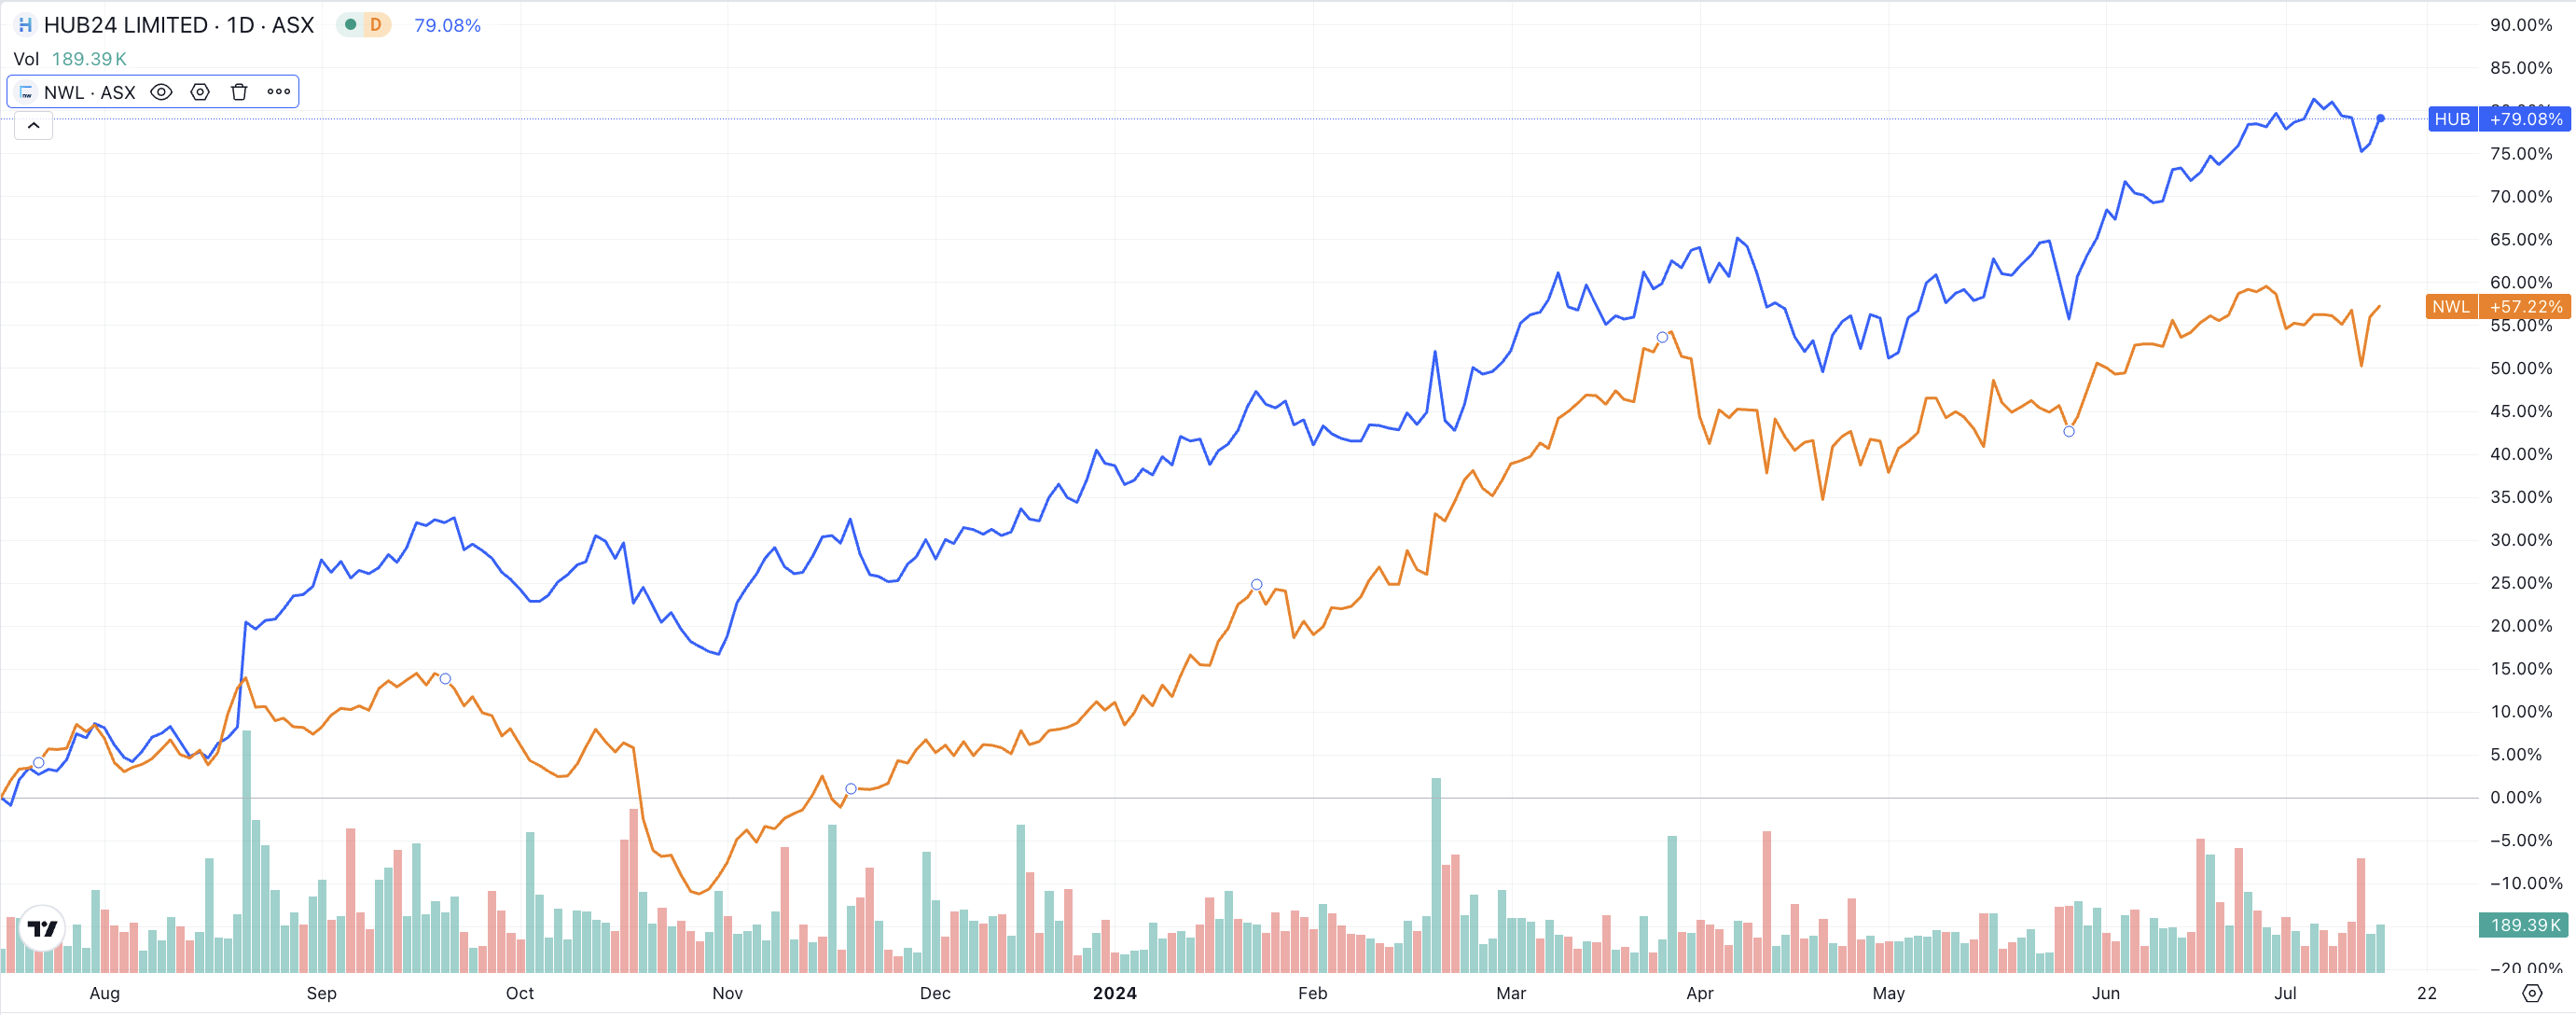 HUB24 and Netwealth, over the last 12 months (Source: Market Index, TradingView)